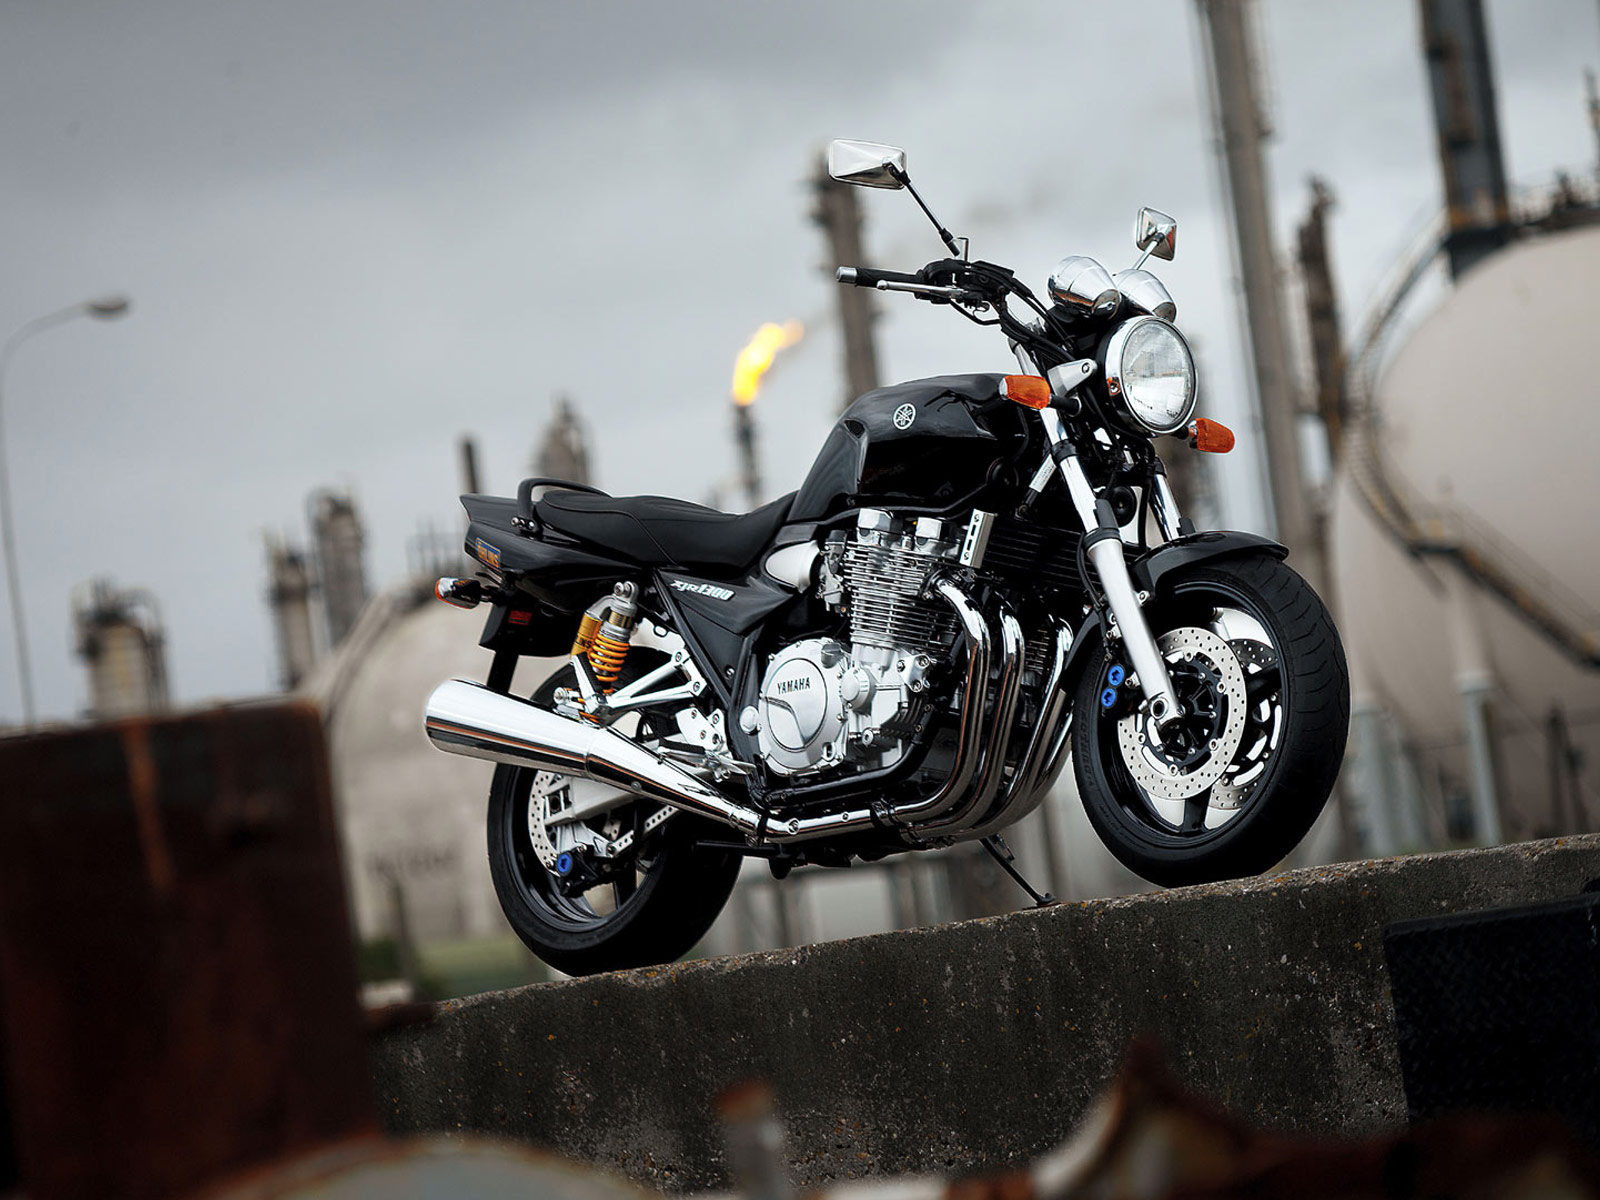 2005 Yamaha XJR 1300: pics, specs and information 